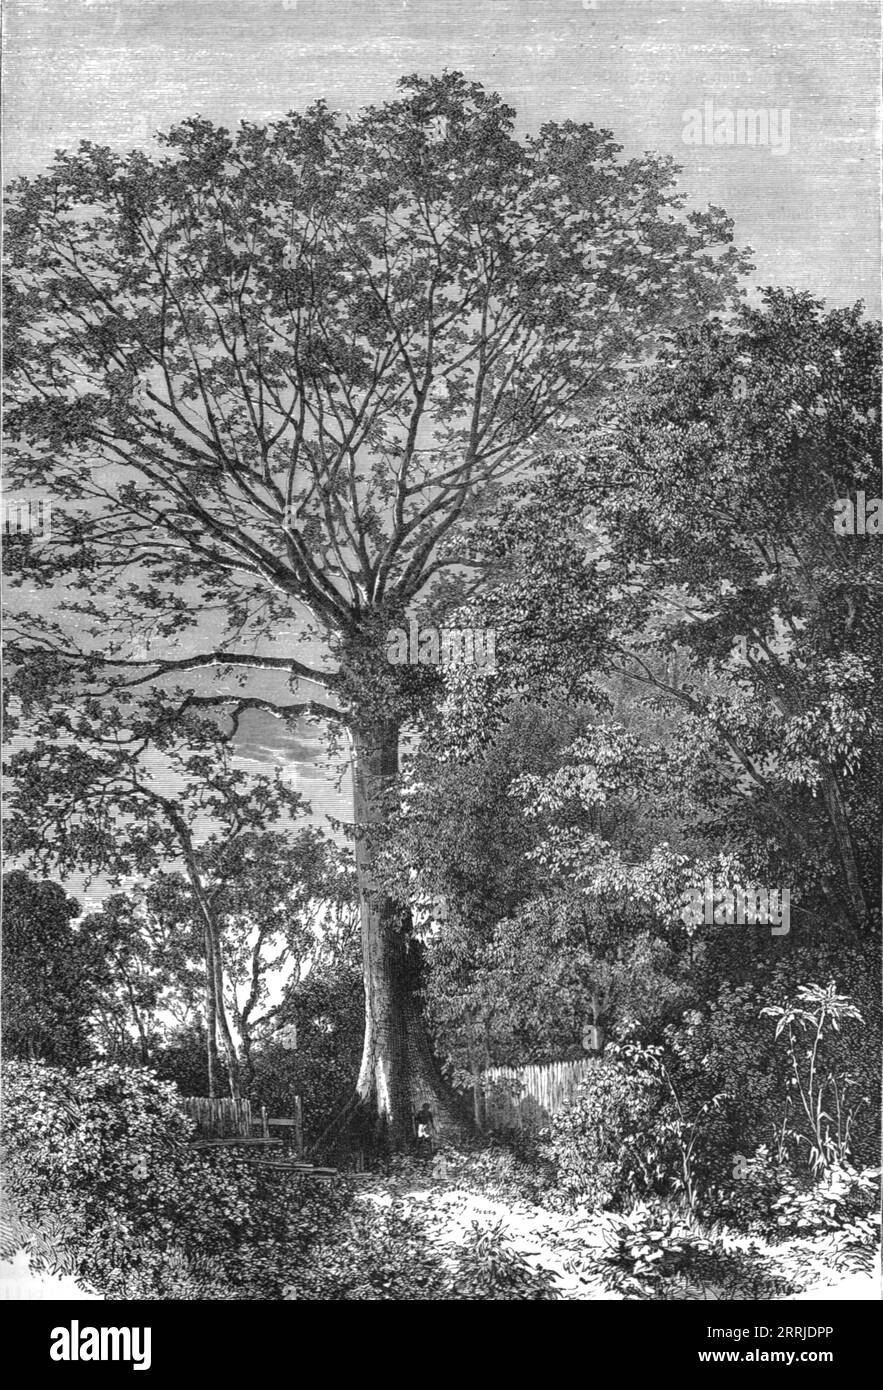 'Samauma Tree of the Amazonian Forests; Indian-Rubber Groves of the Amazons', 1875. From 'Illustrated Travels' by H.W. Bates. [Cassell, Petter, and Galpin, c1880, London] and Galpin. Stock Photo